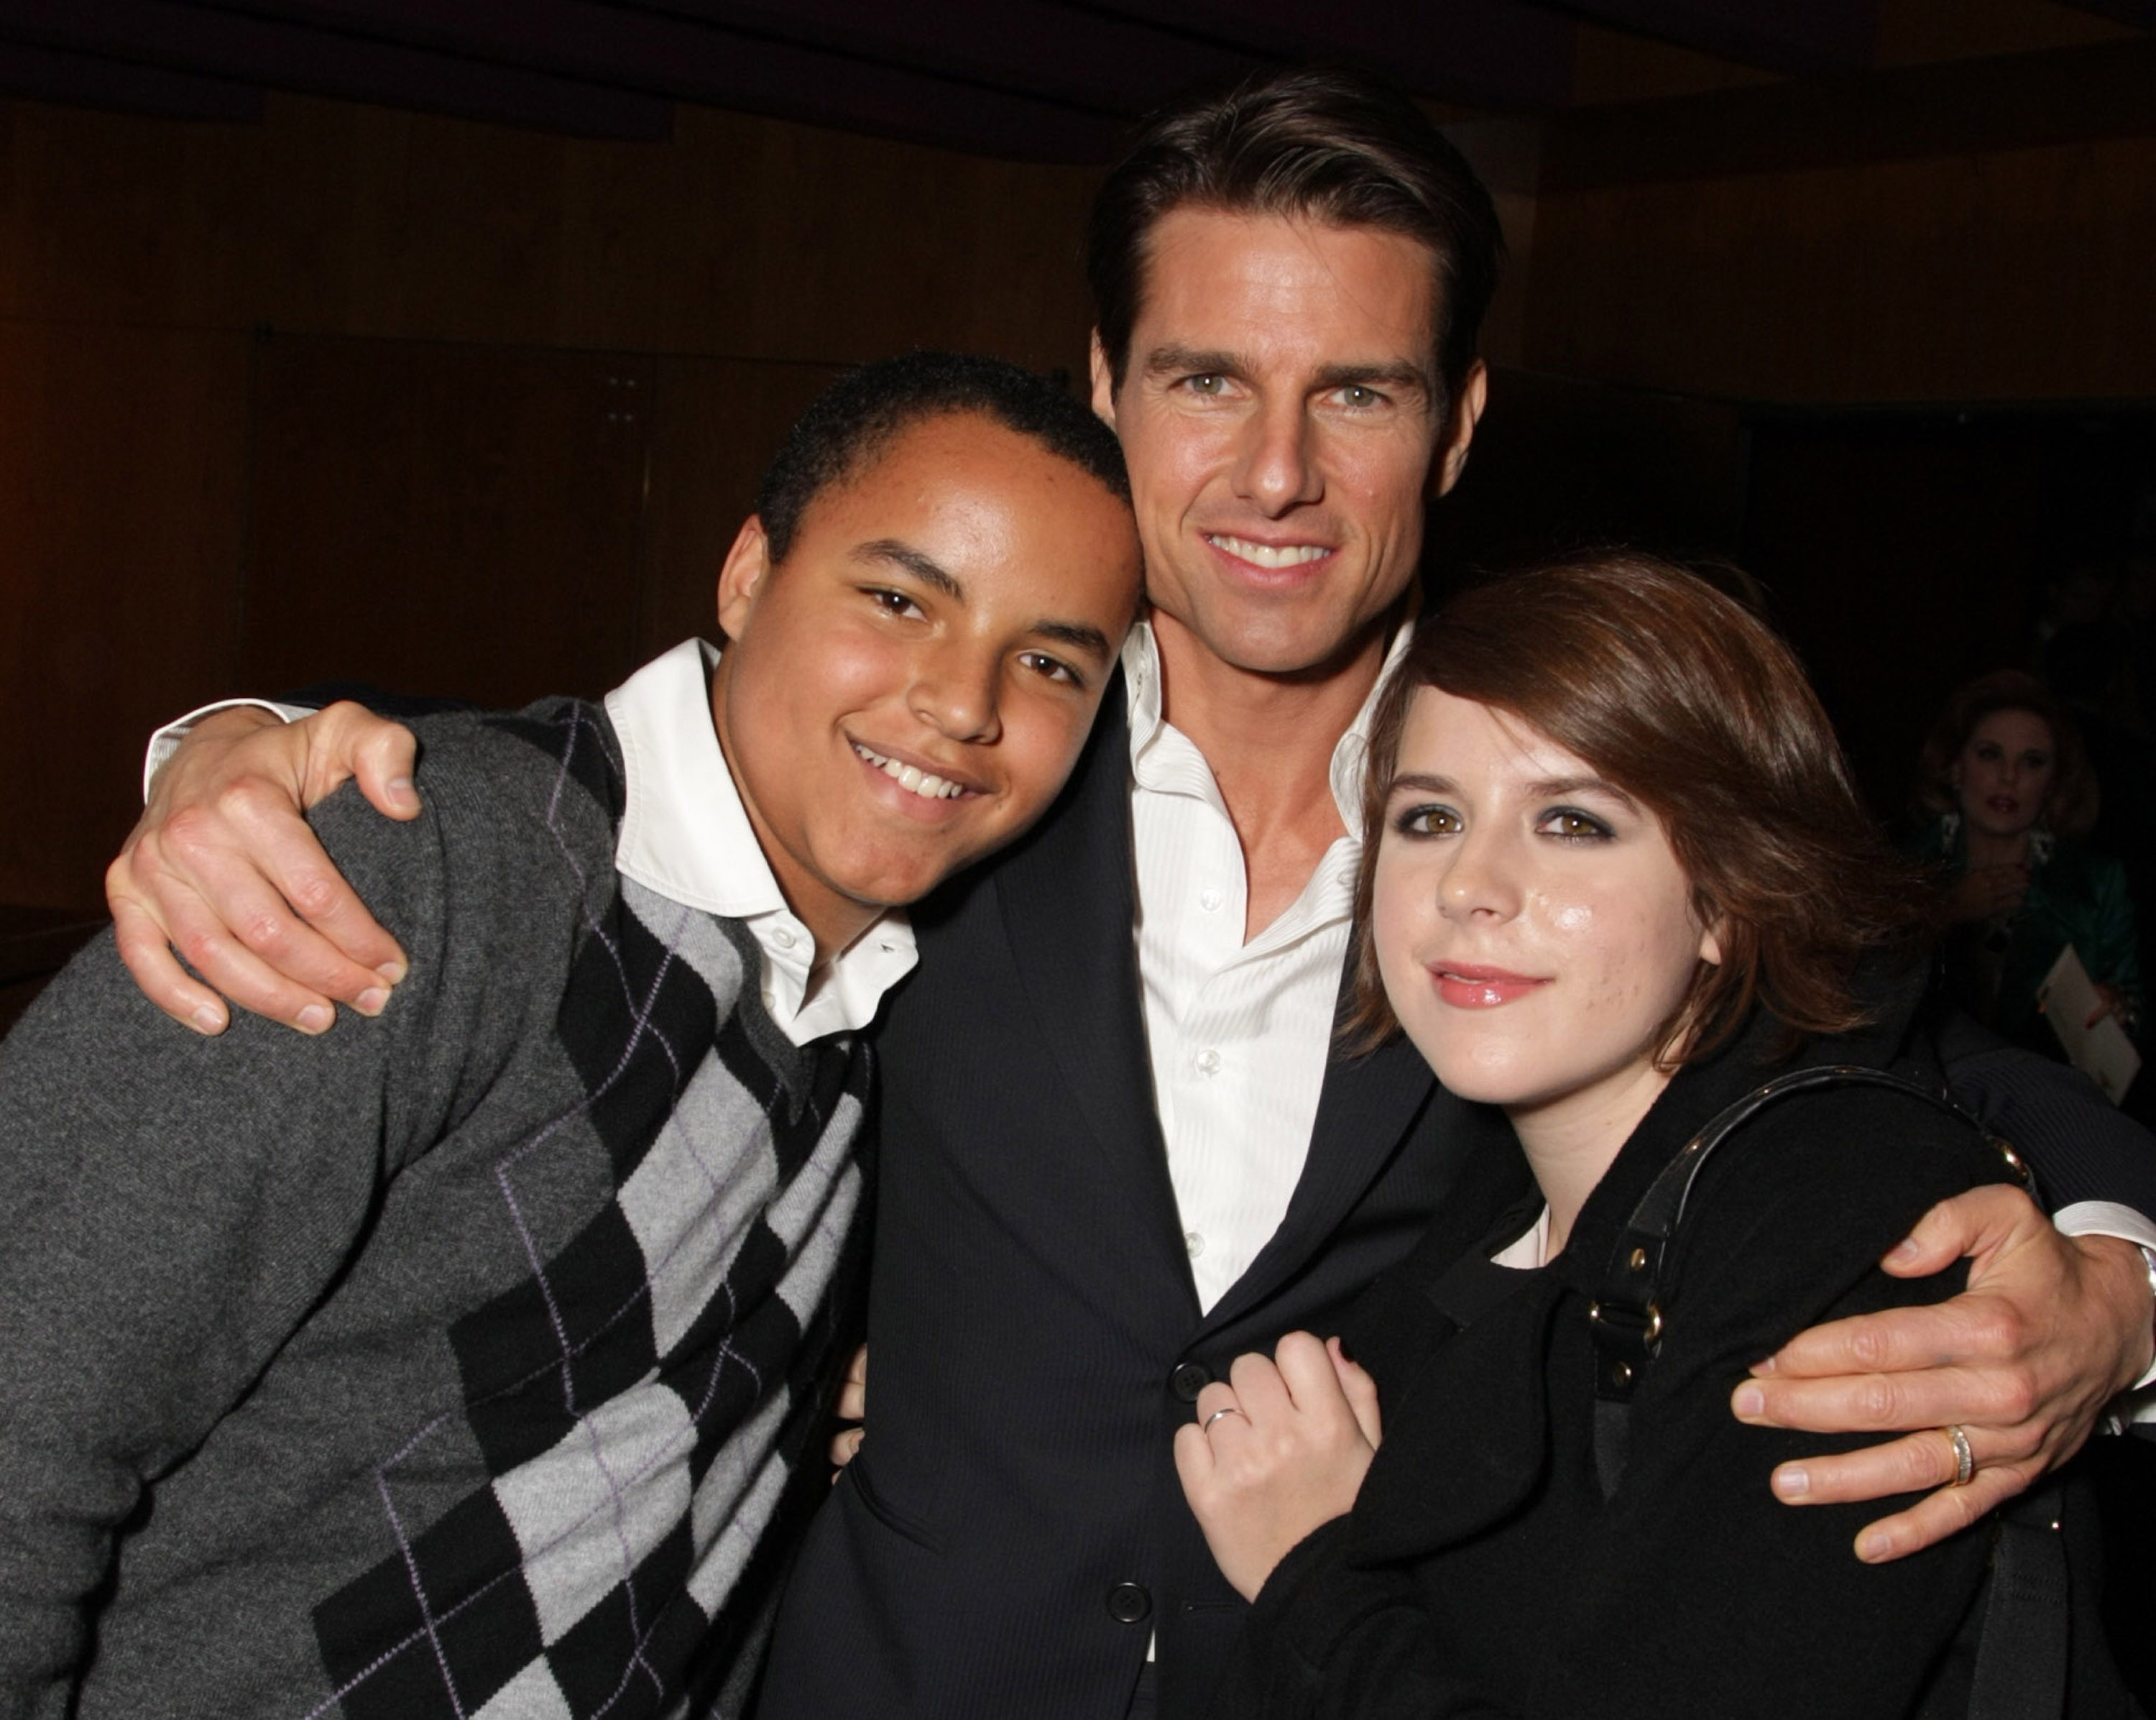 Connor Cruise, Tom Cruise, and Isabella Cruise at United Artists Pictures and MGM premiere of 'Valkyrie' in Los Angeles, California on December 18, 2008 | Source: Getty Images